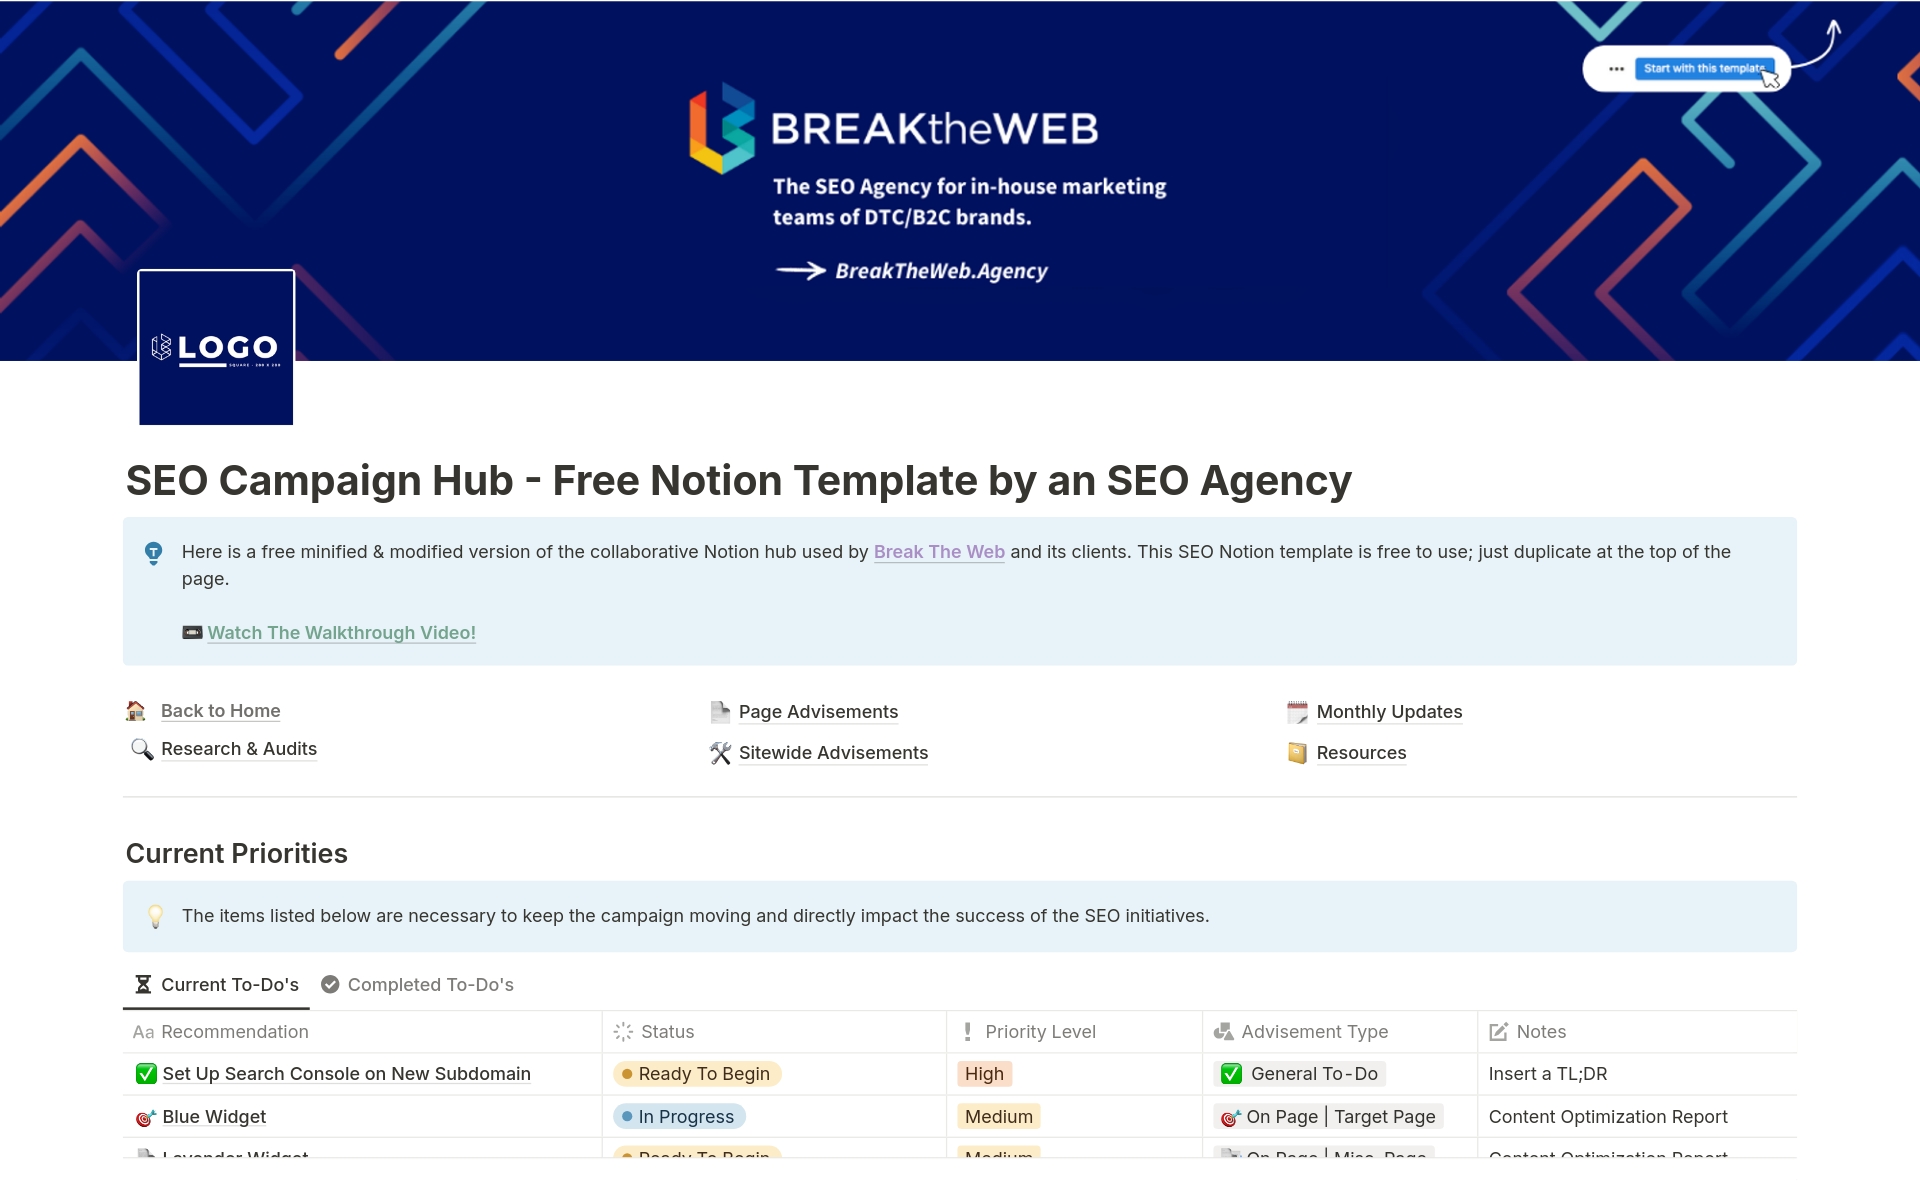 The free SEO Campaign Hub Notion Template is a modified version of the Notion Hub used by the Break The Web team.

Built via a single database with 5 scenario templates, this template will help Marketing & SEO teams stay organized and on top of all SEO initiatives.